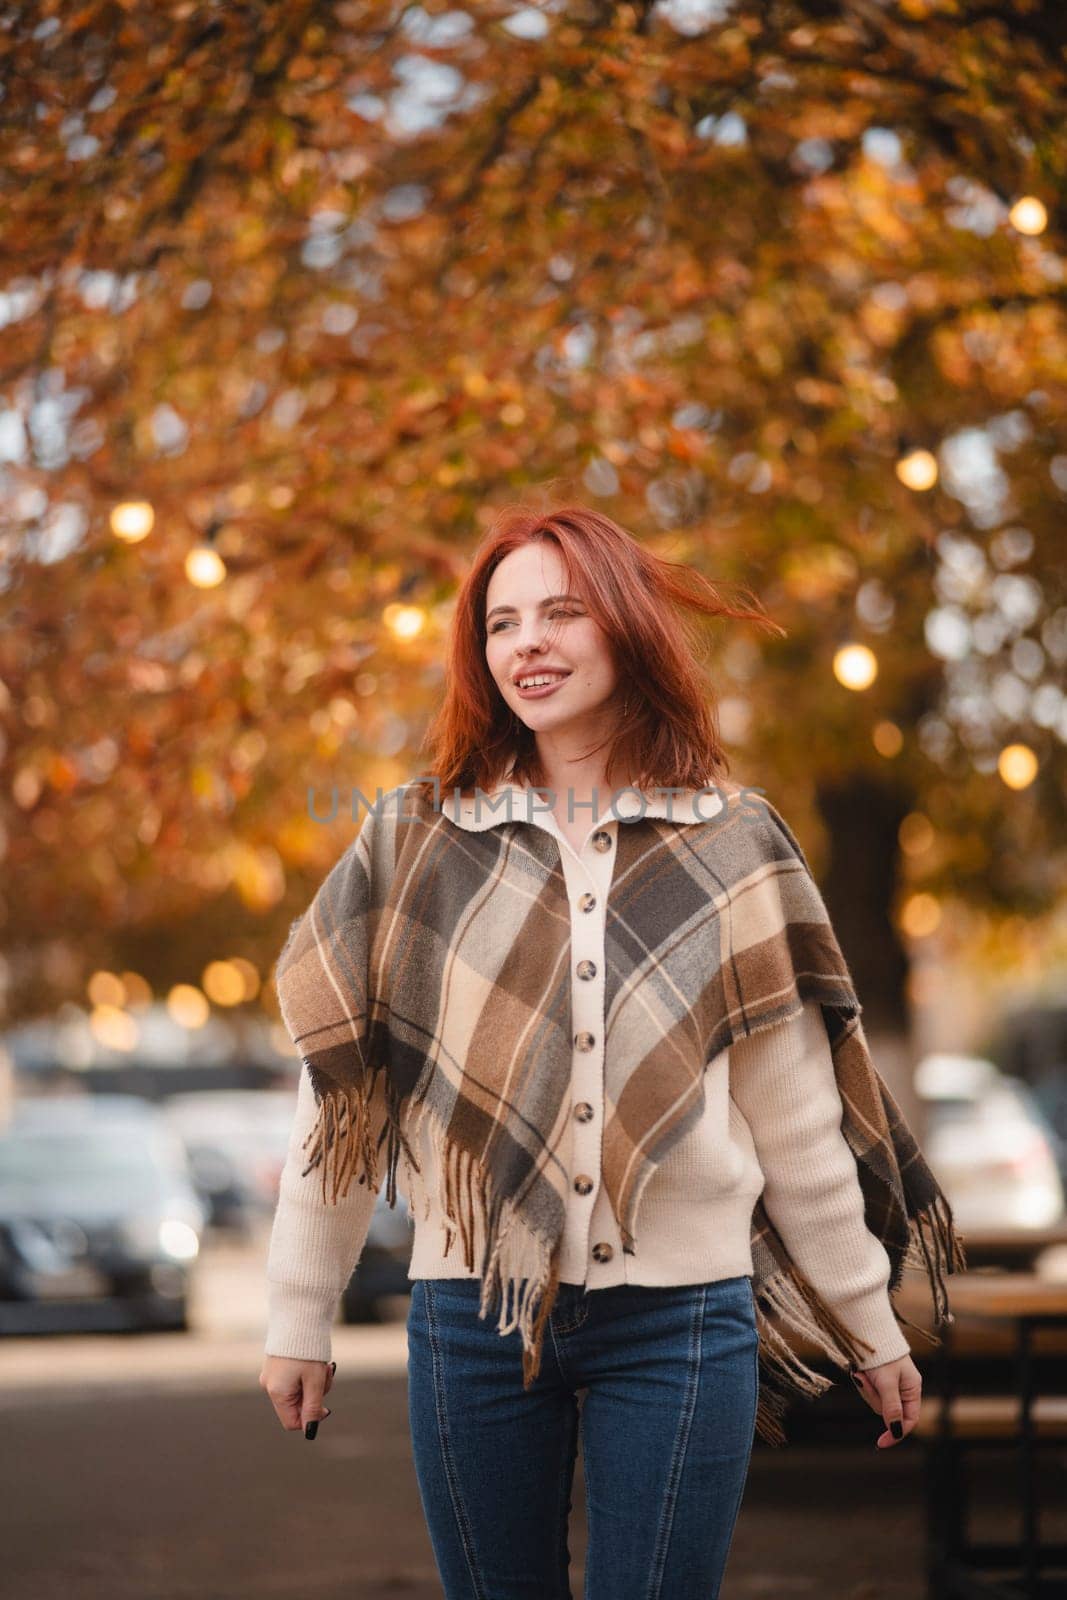 A spirited red-haired girl chuckles joyfully, adding charm to the autumn cityscape. High quality photo